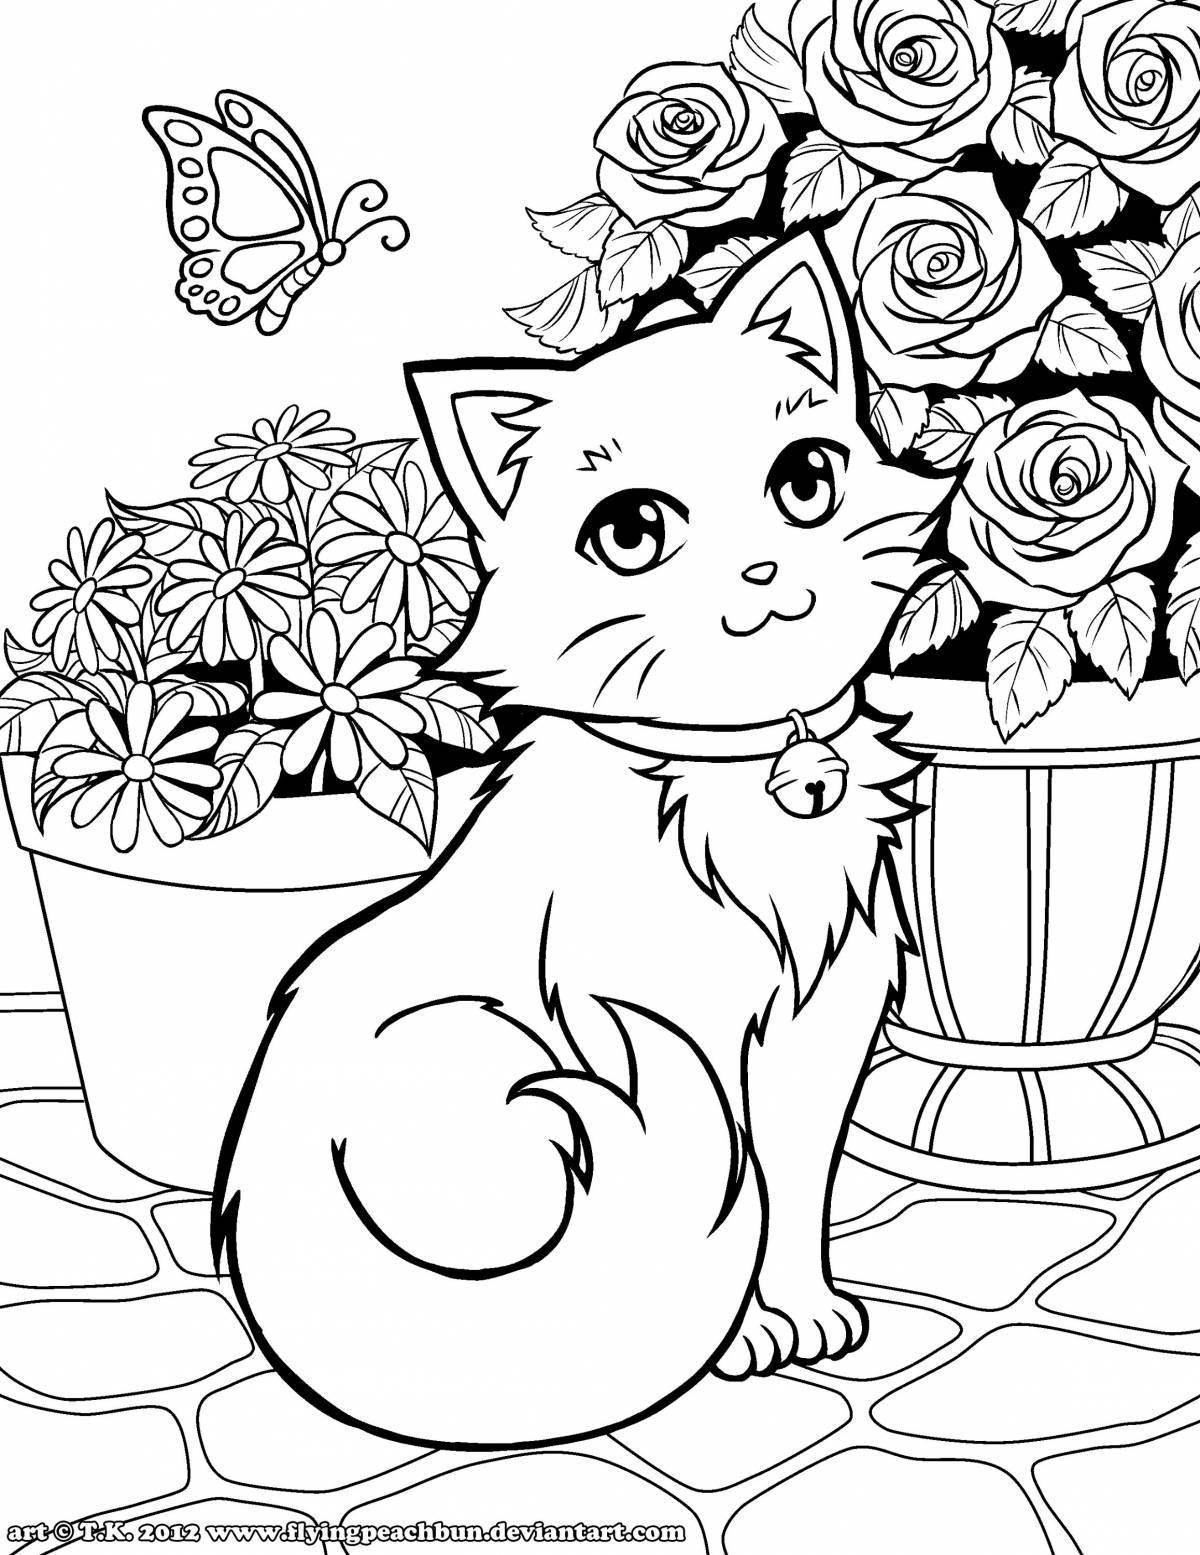 Glorious kitty coloring book for kids 6-7 years old